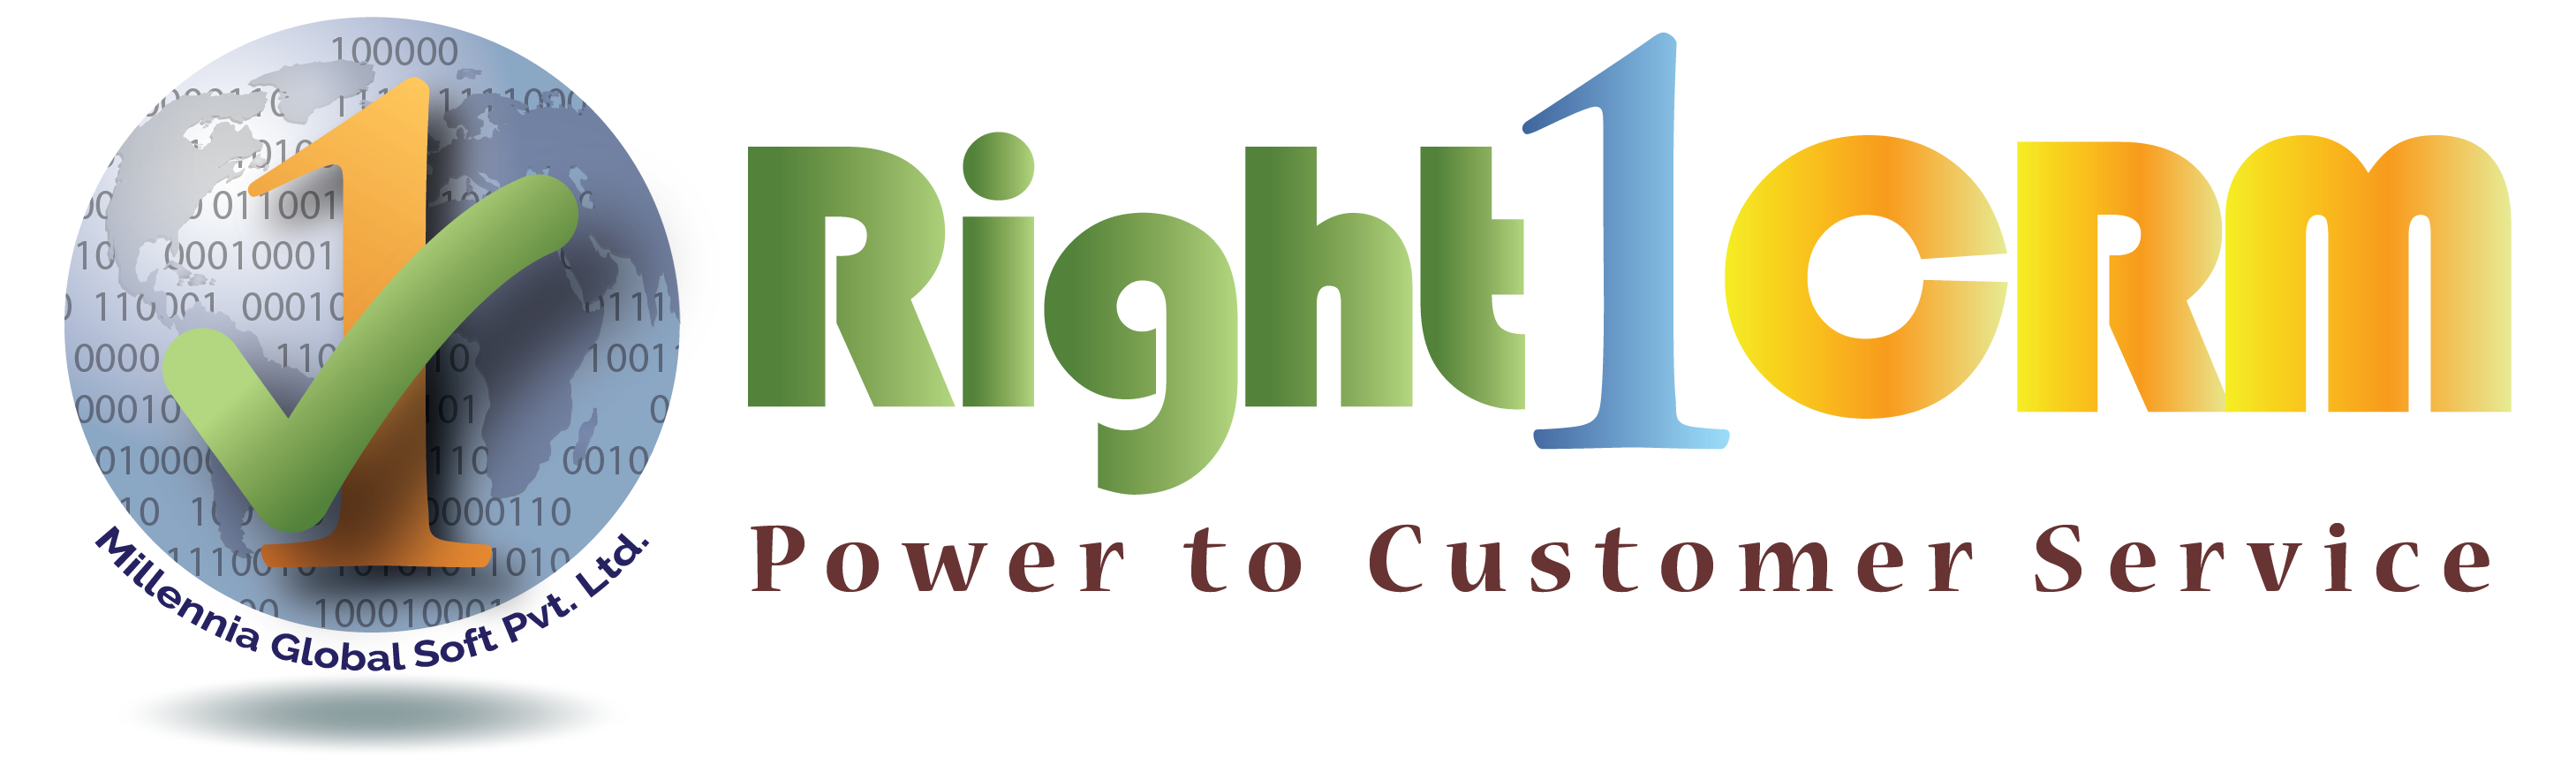 Right1CRM